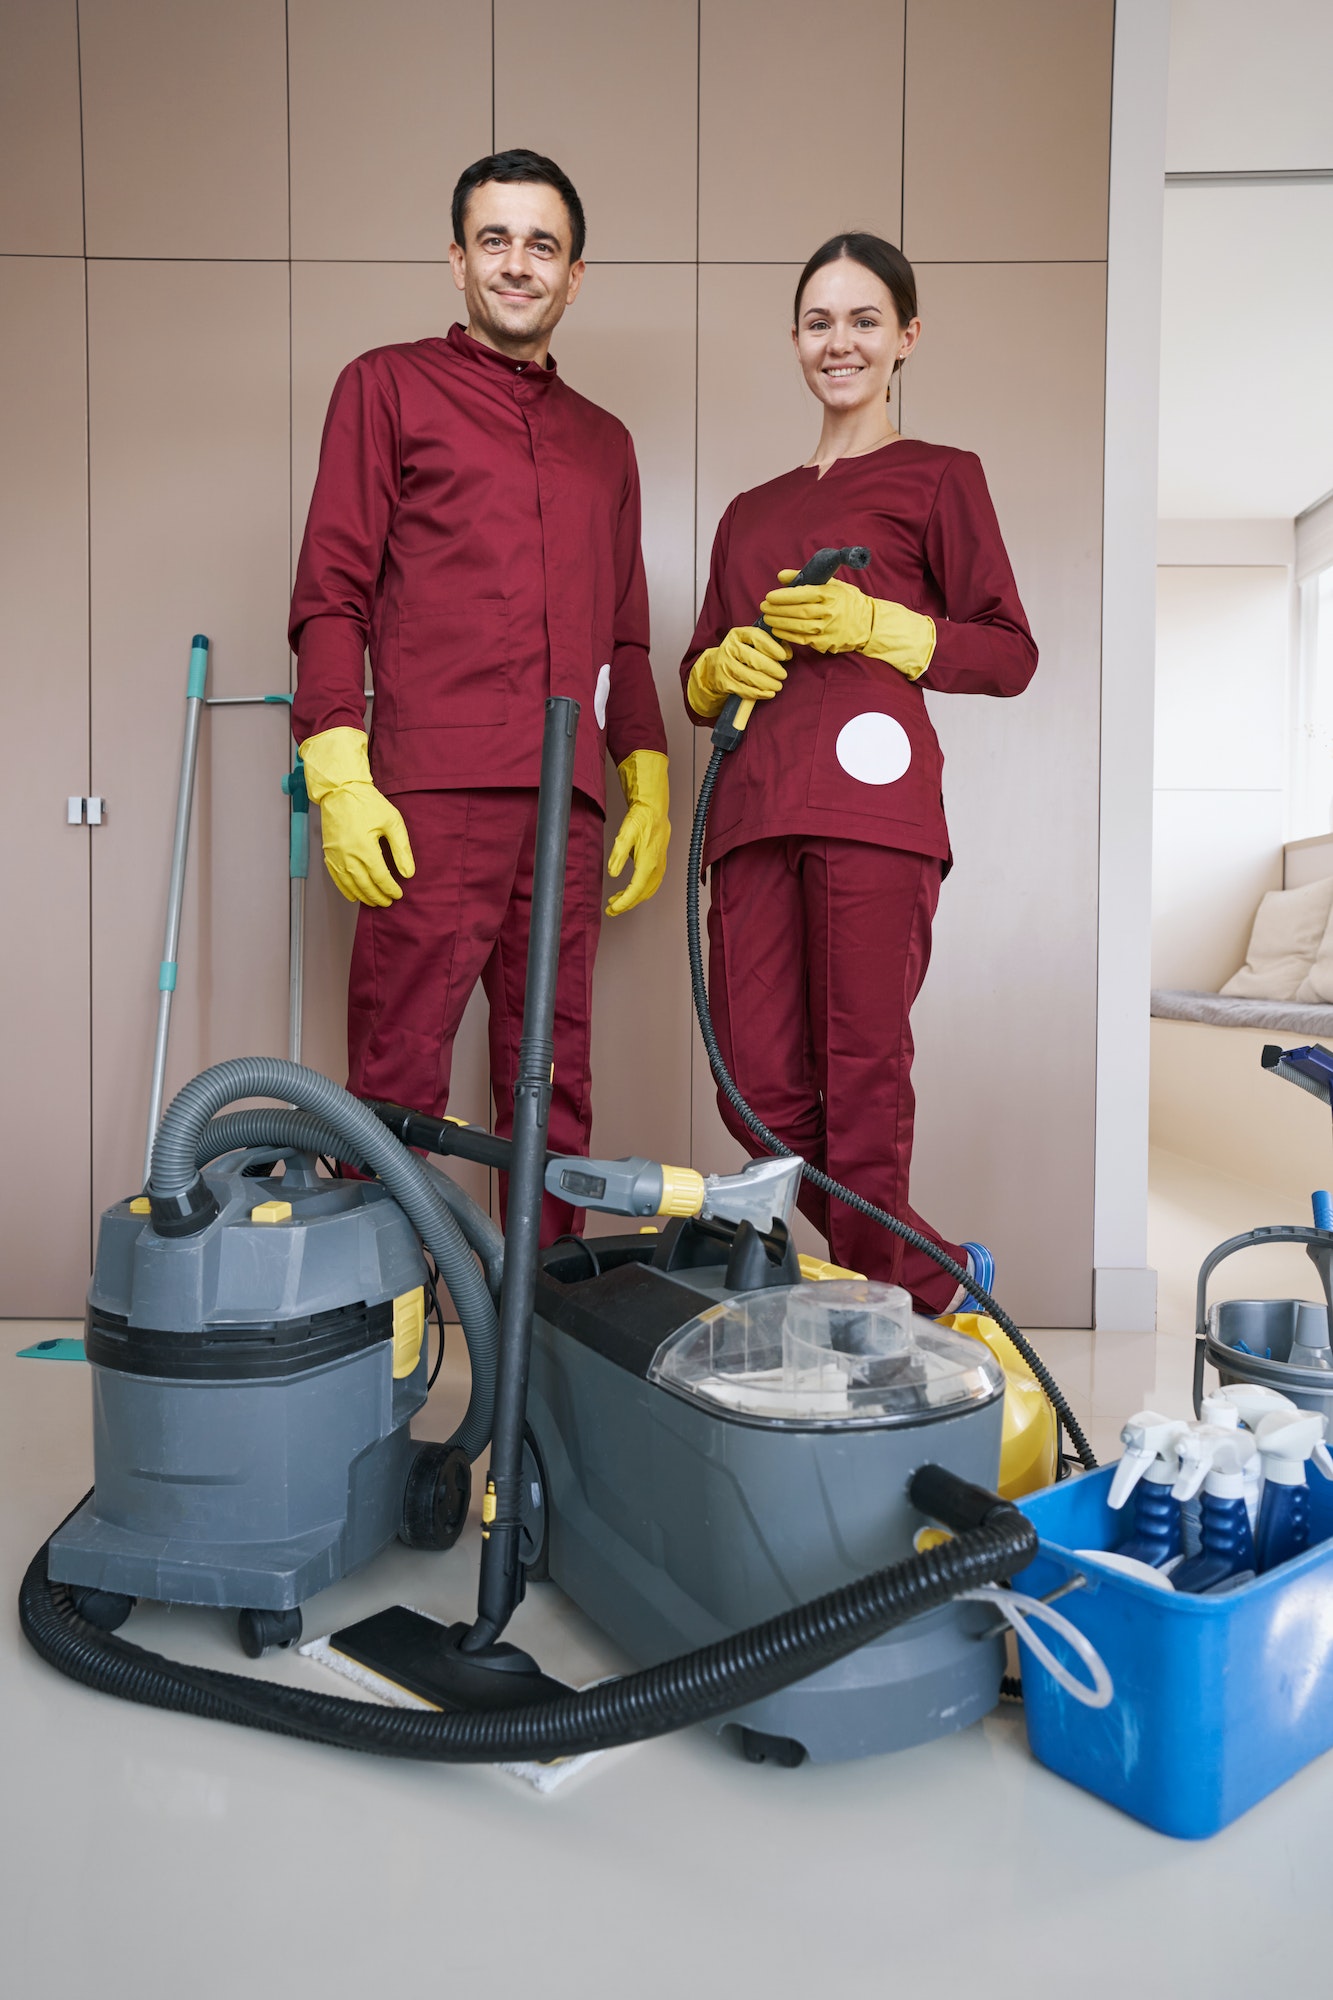 Cheerful housecleaners with cleaning equipment standing in room